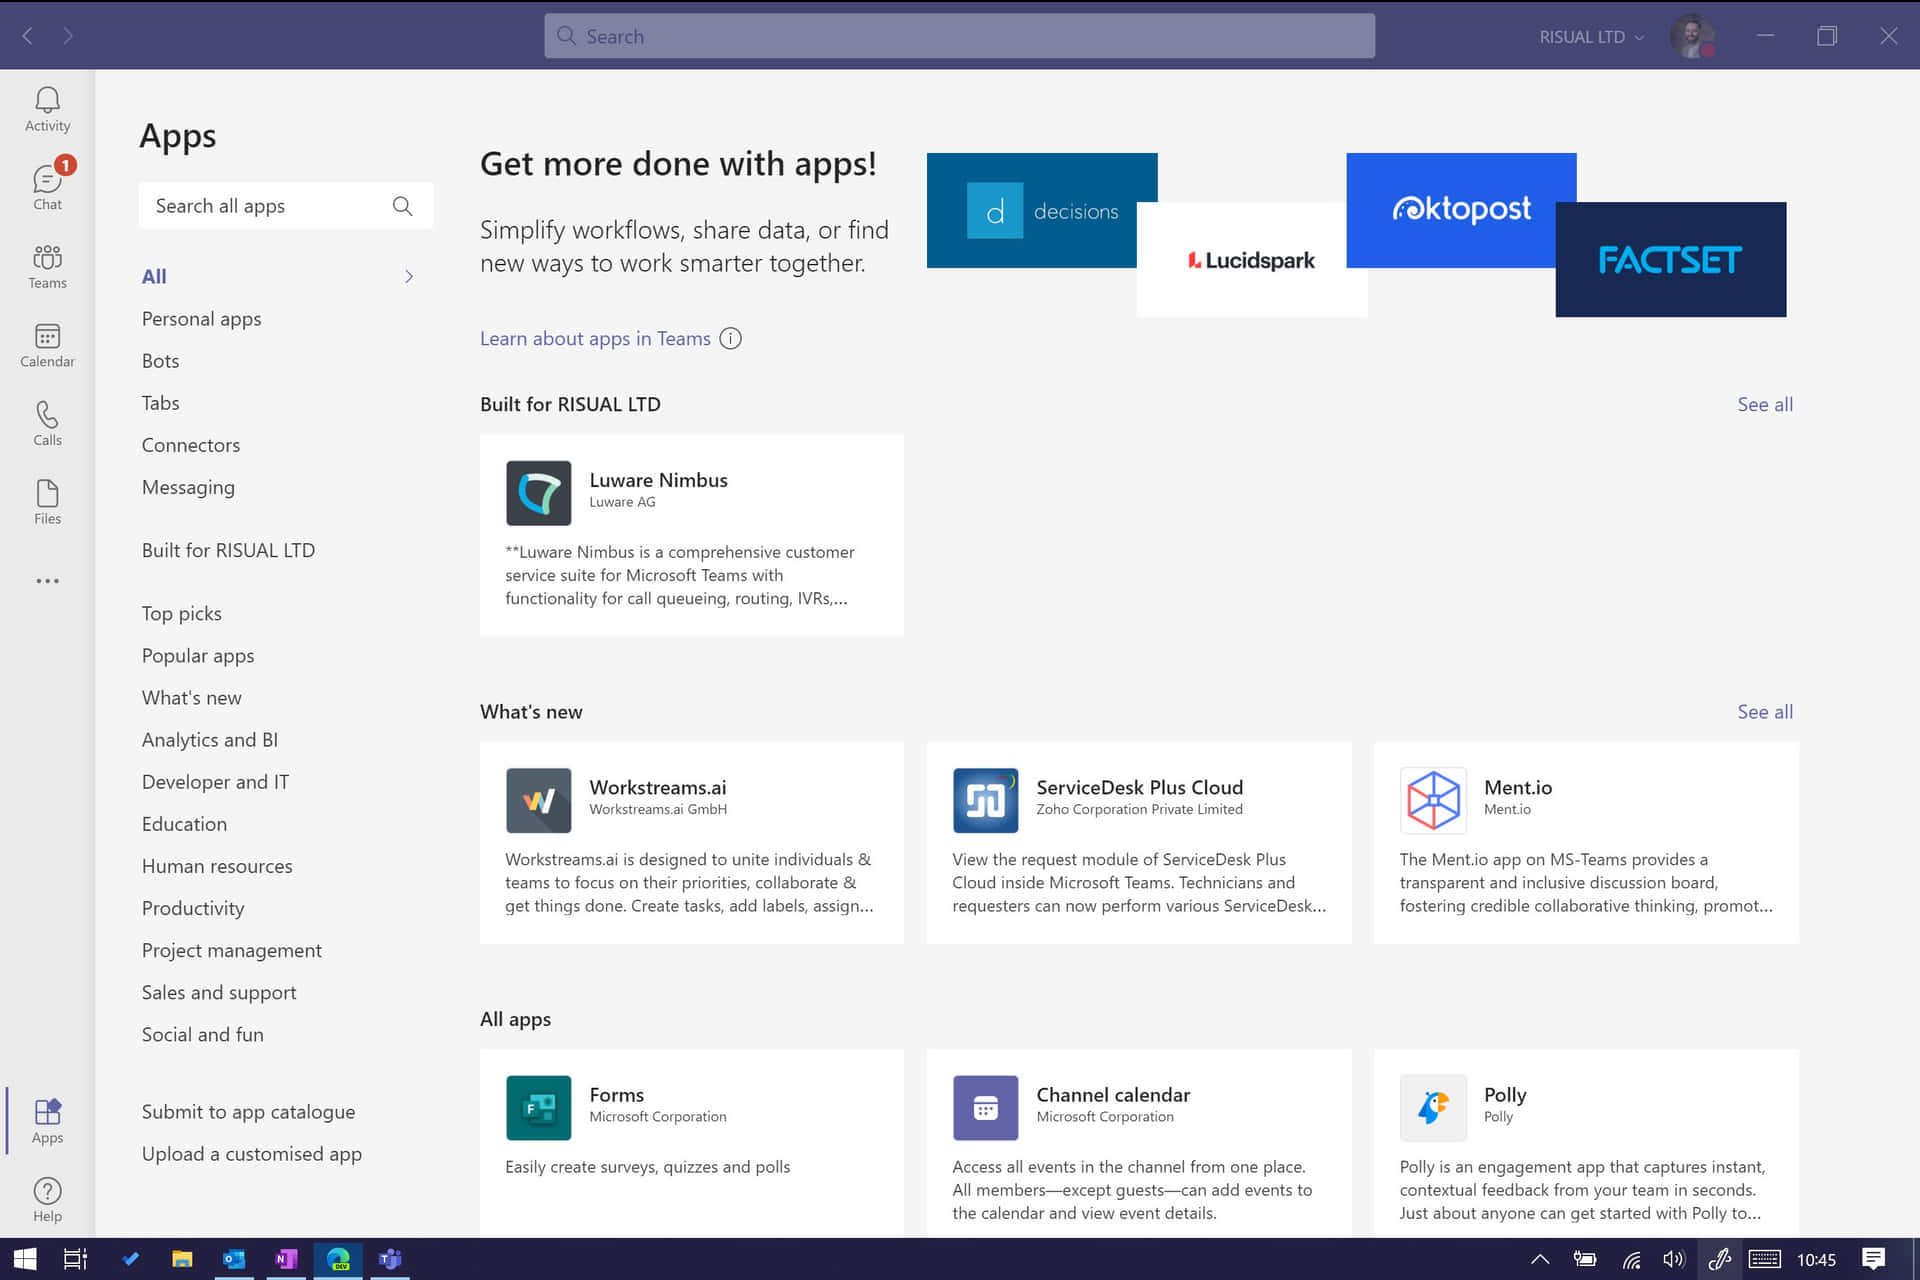 Stay connected with your team on Microsoft Teams